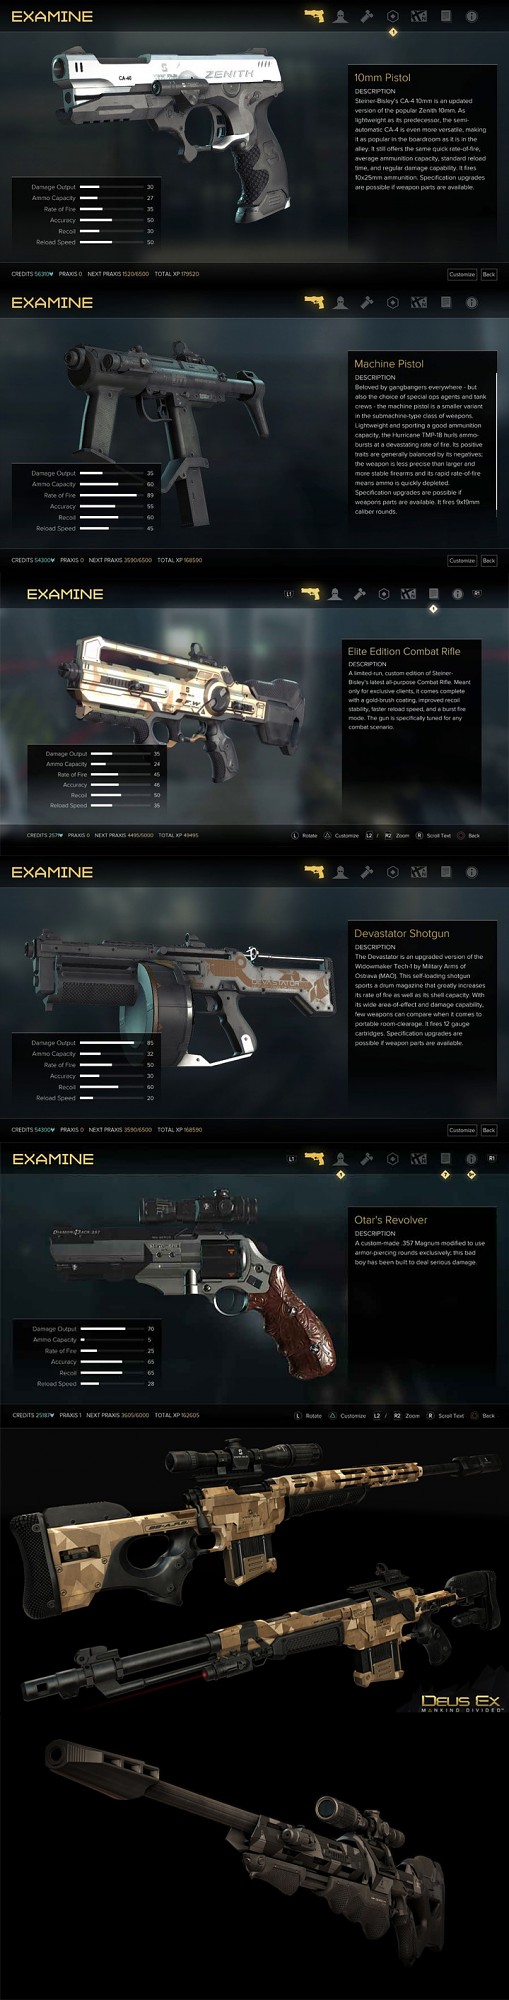 DX MD weapons to include in the weapon pool